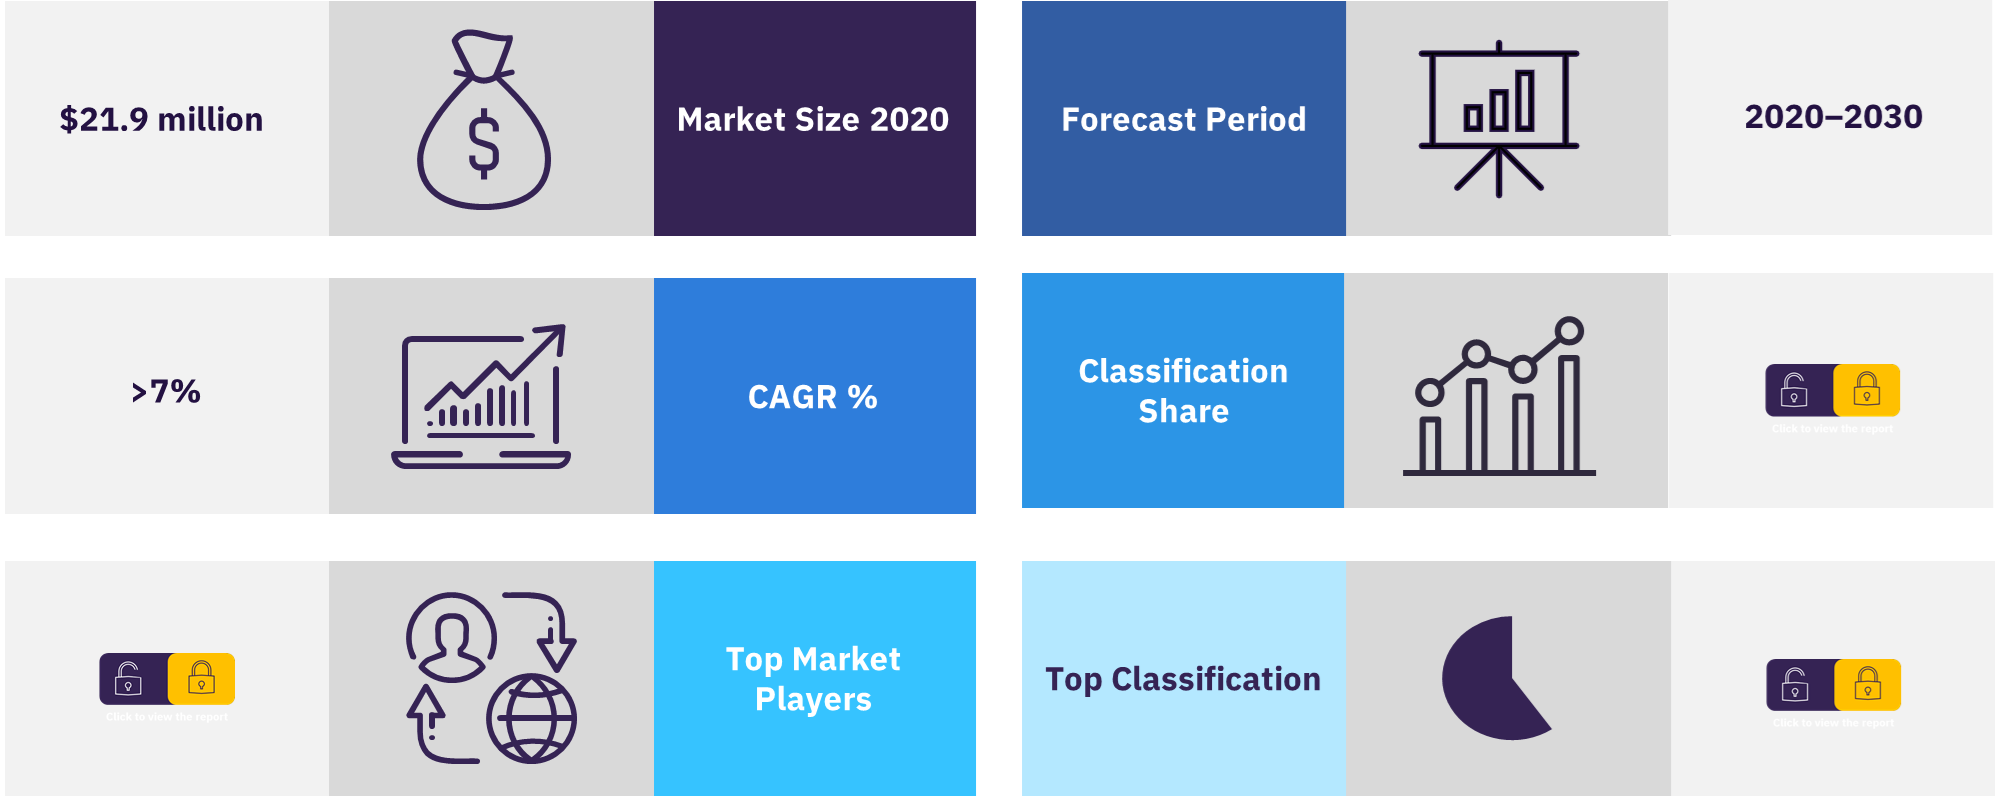 Overview of the FXS market